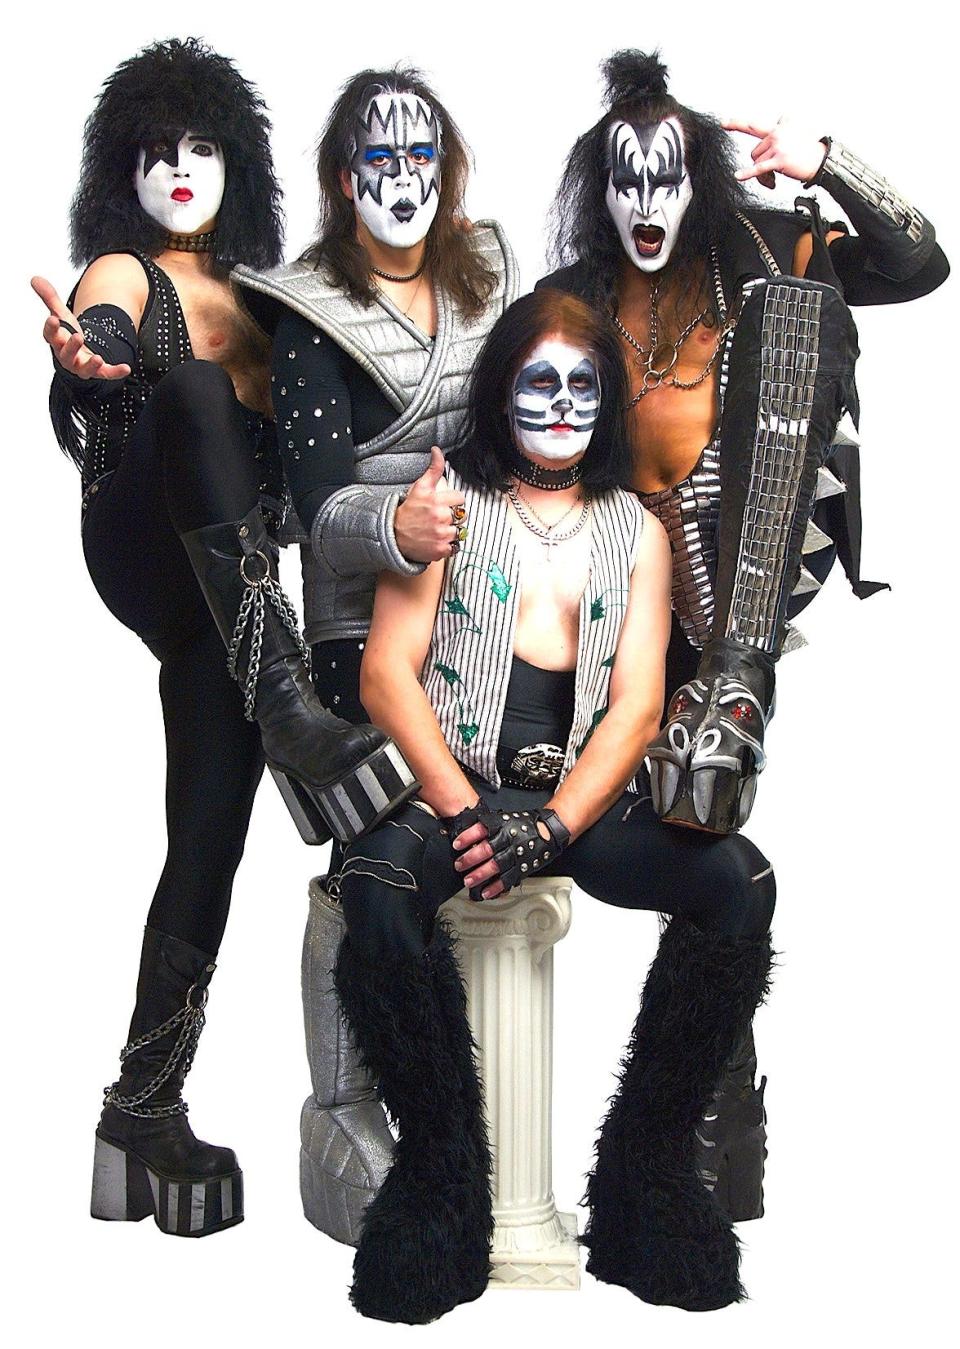 War Machine is a full costume and makeup musical tribute to the 1970s rock band Kiss. The tribute band has been performing nationally for more than 18 years and plays an assortment of hit songs from the Kiss's career with a stage show. The band will perform from 8 to 10 p.m. Saturday, Aug. 13, at the third annual Blissfield on Tap craft beer festival in downtown Blissfield.